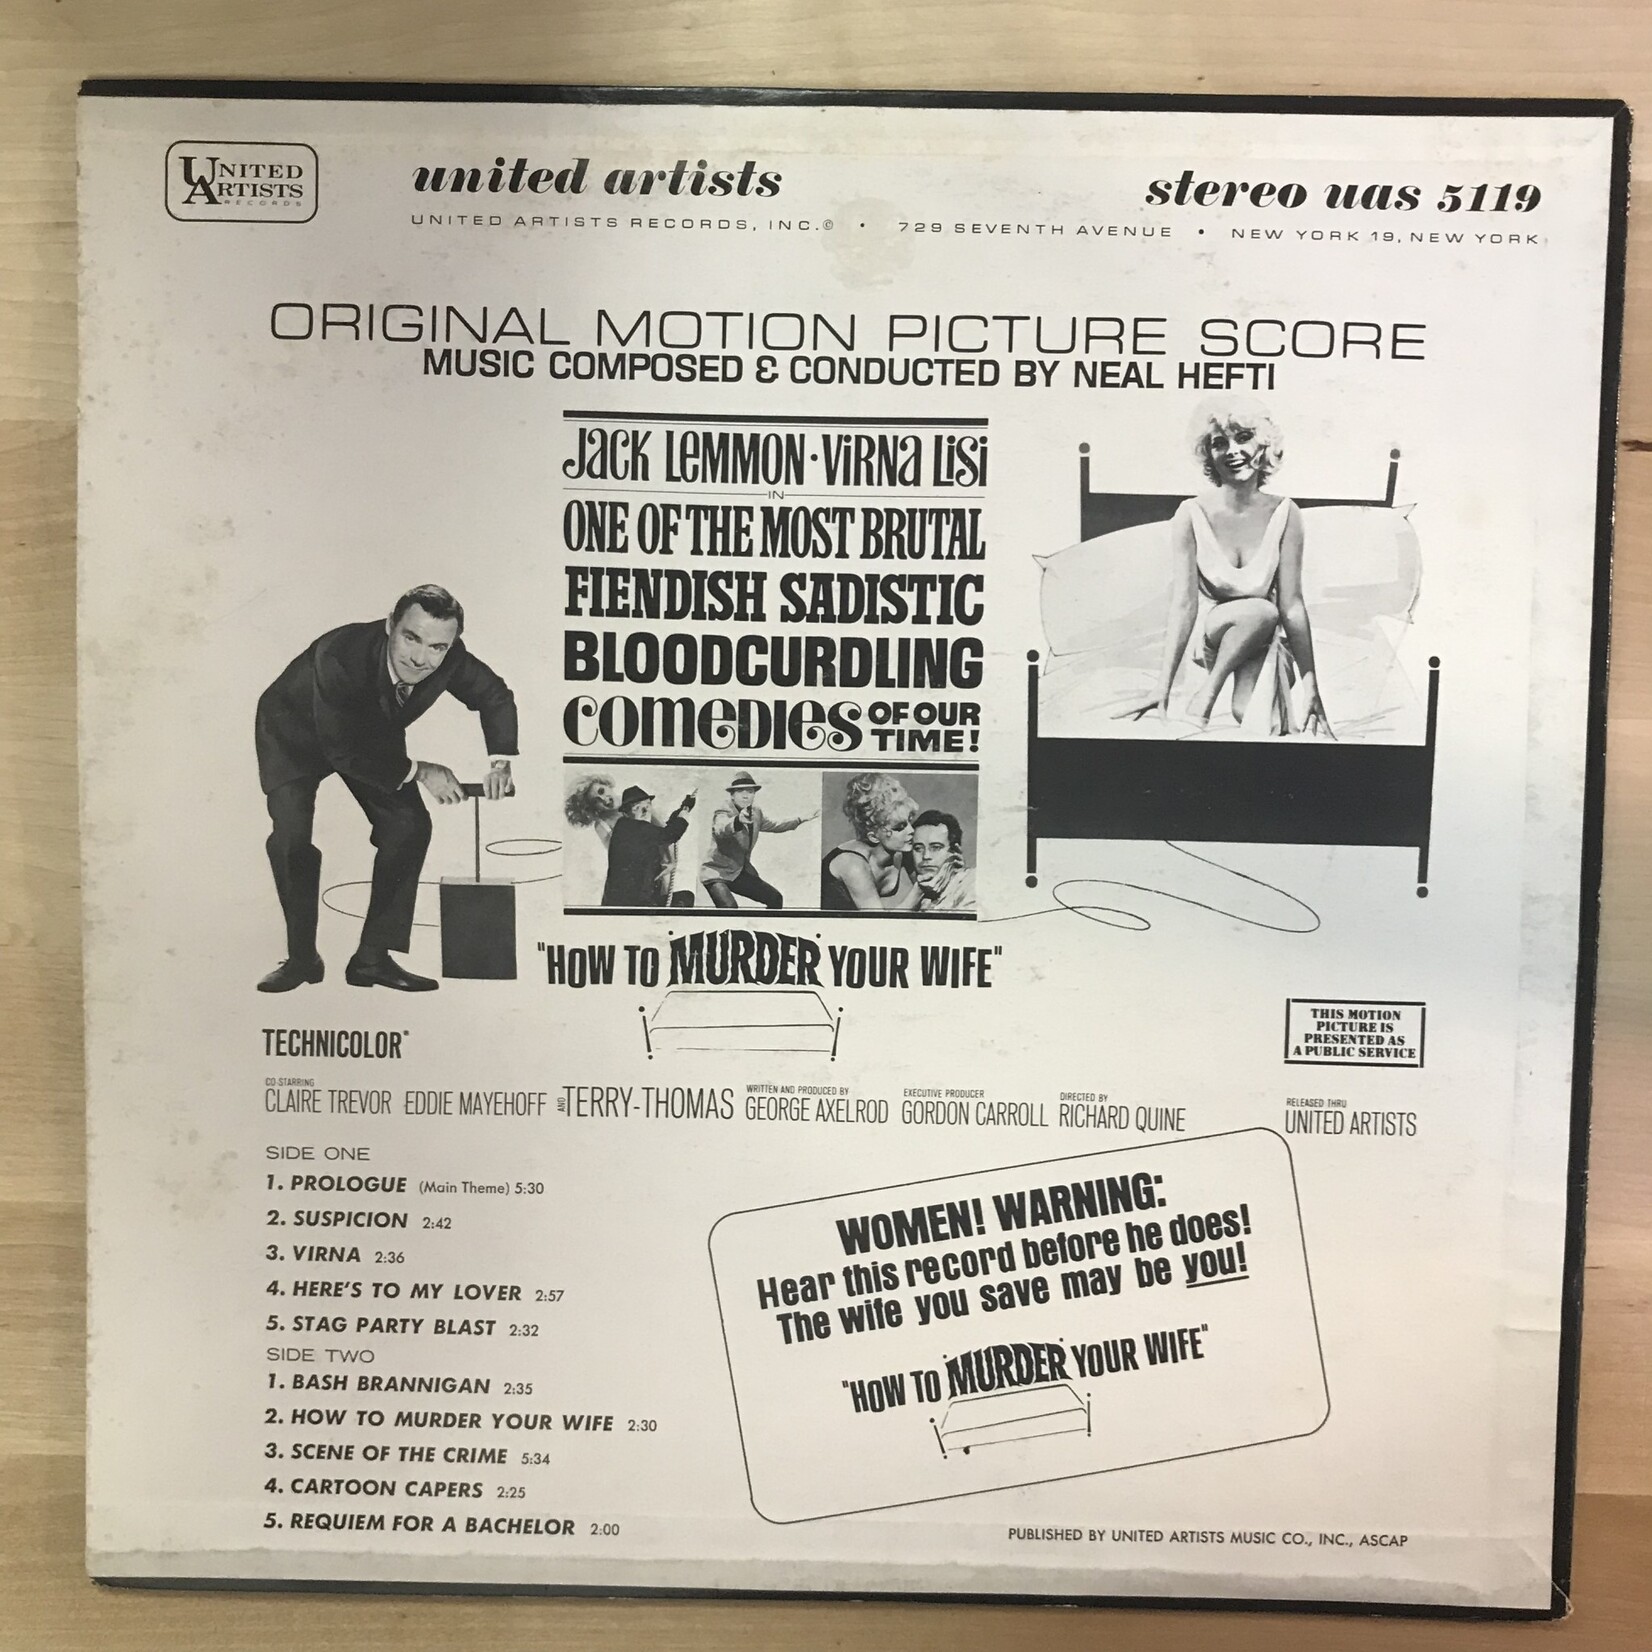 How To Murder Your Wife - Original Motion Picture Score - UAS5119 - Vinyl LP (USED)